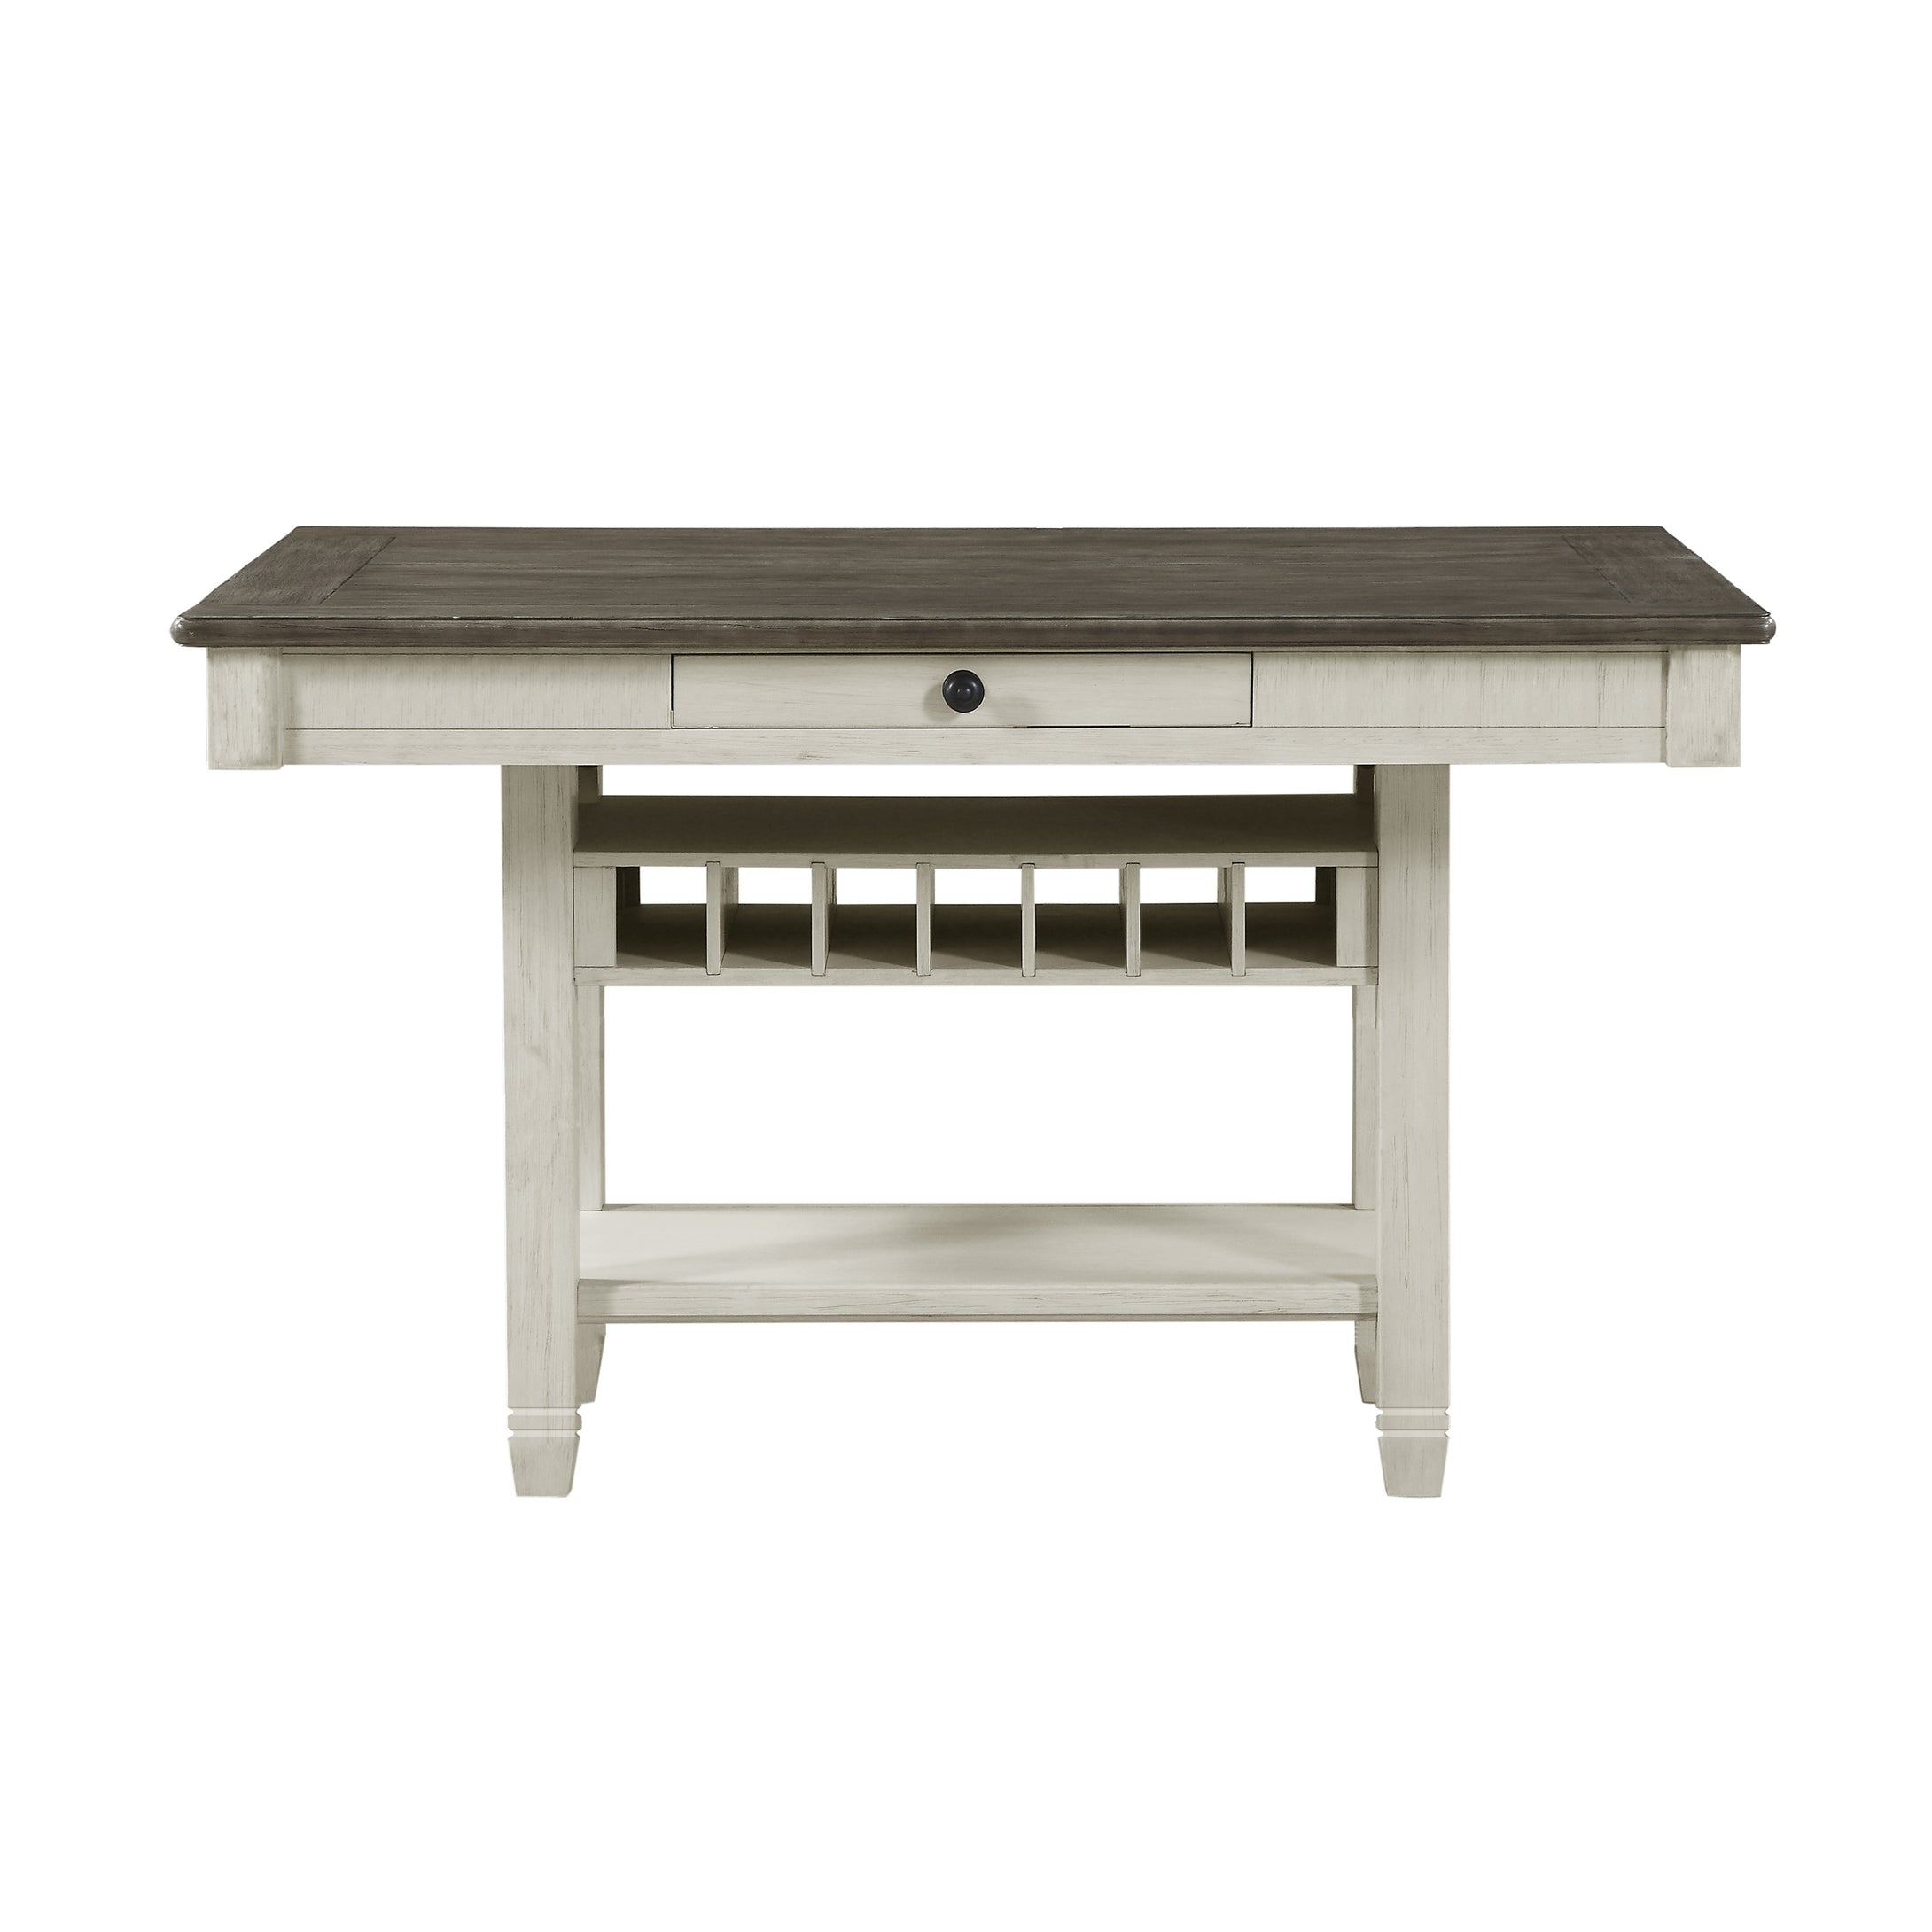 5627NW-36* Counter Height Table